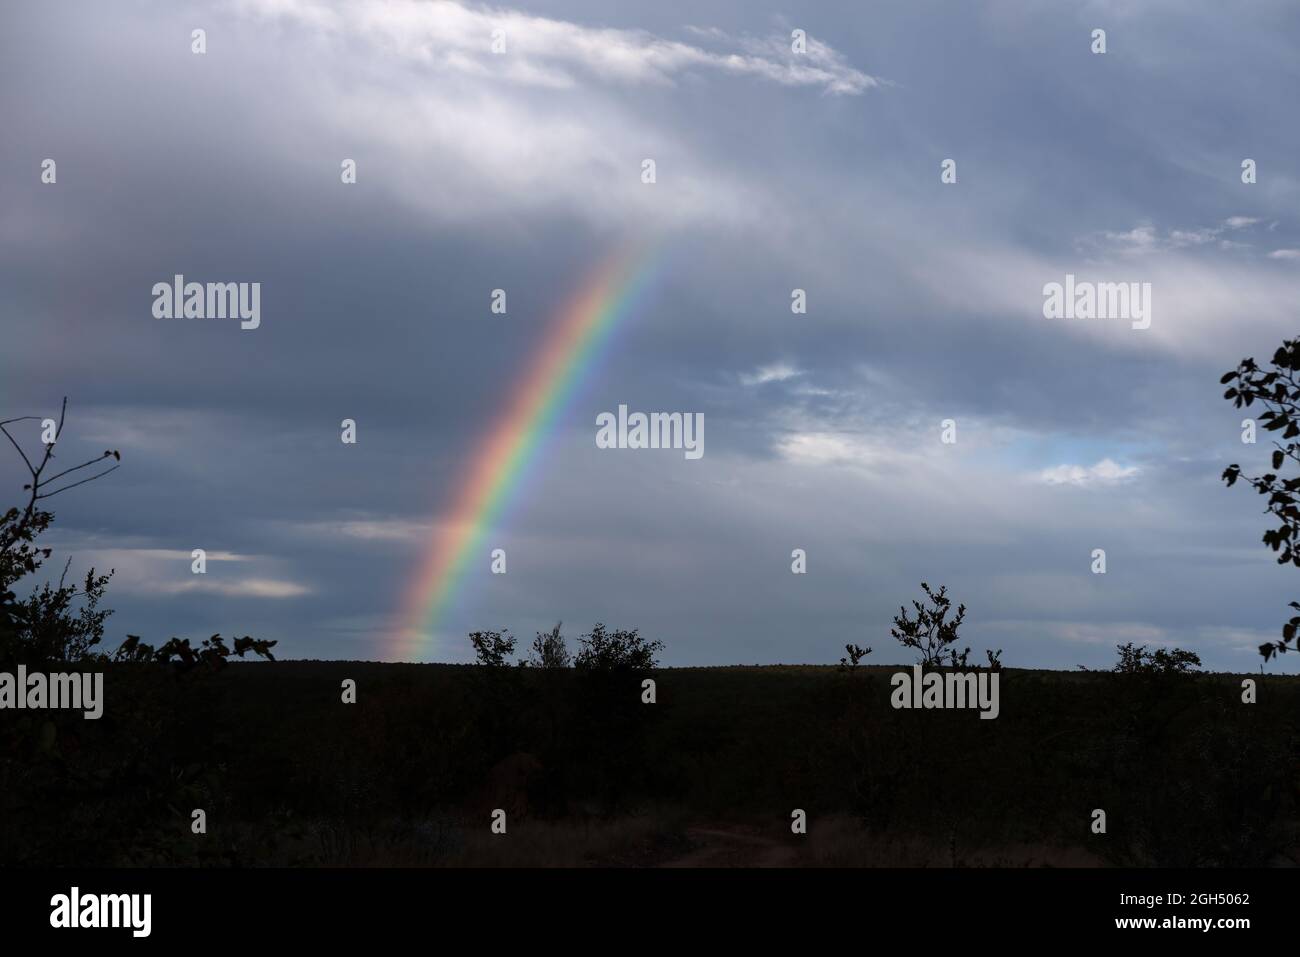 A beautiful rainbow in a partly cloudy sky Stock Photo